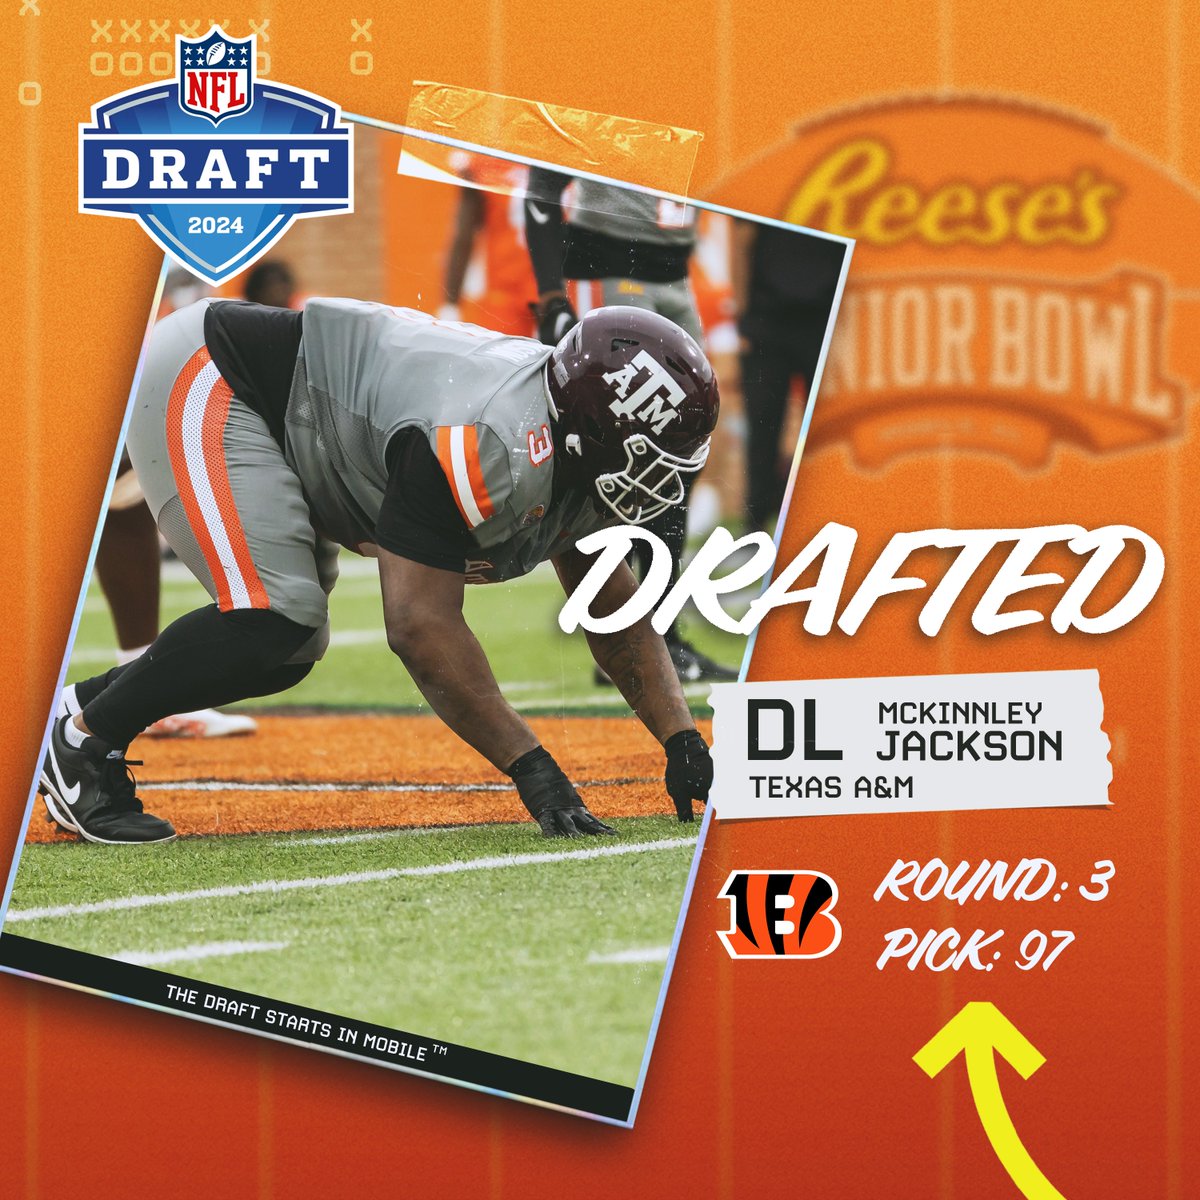 The Pick Is In! The @Bengals have selected Senior Bowl alum @macfrmGSF_ out of @AggieFootball. #NFLDraft #RuleTheJungle #TheDraftStartsInMOBILE™️